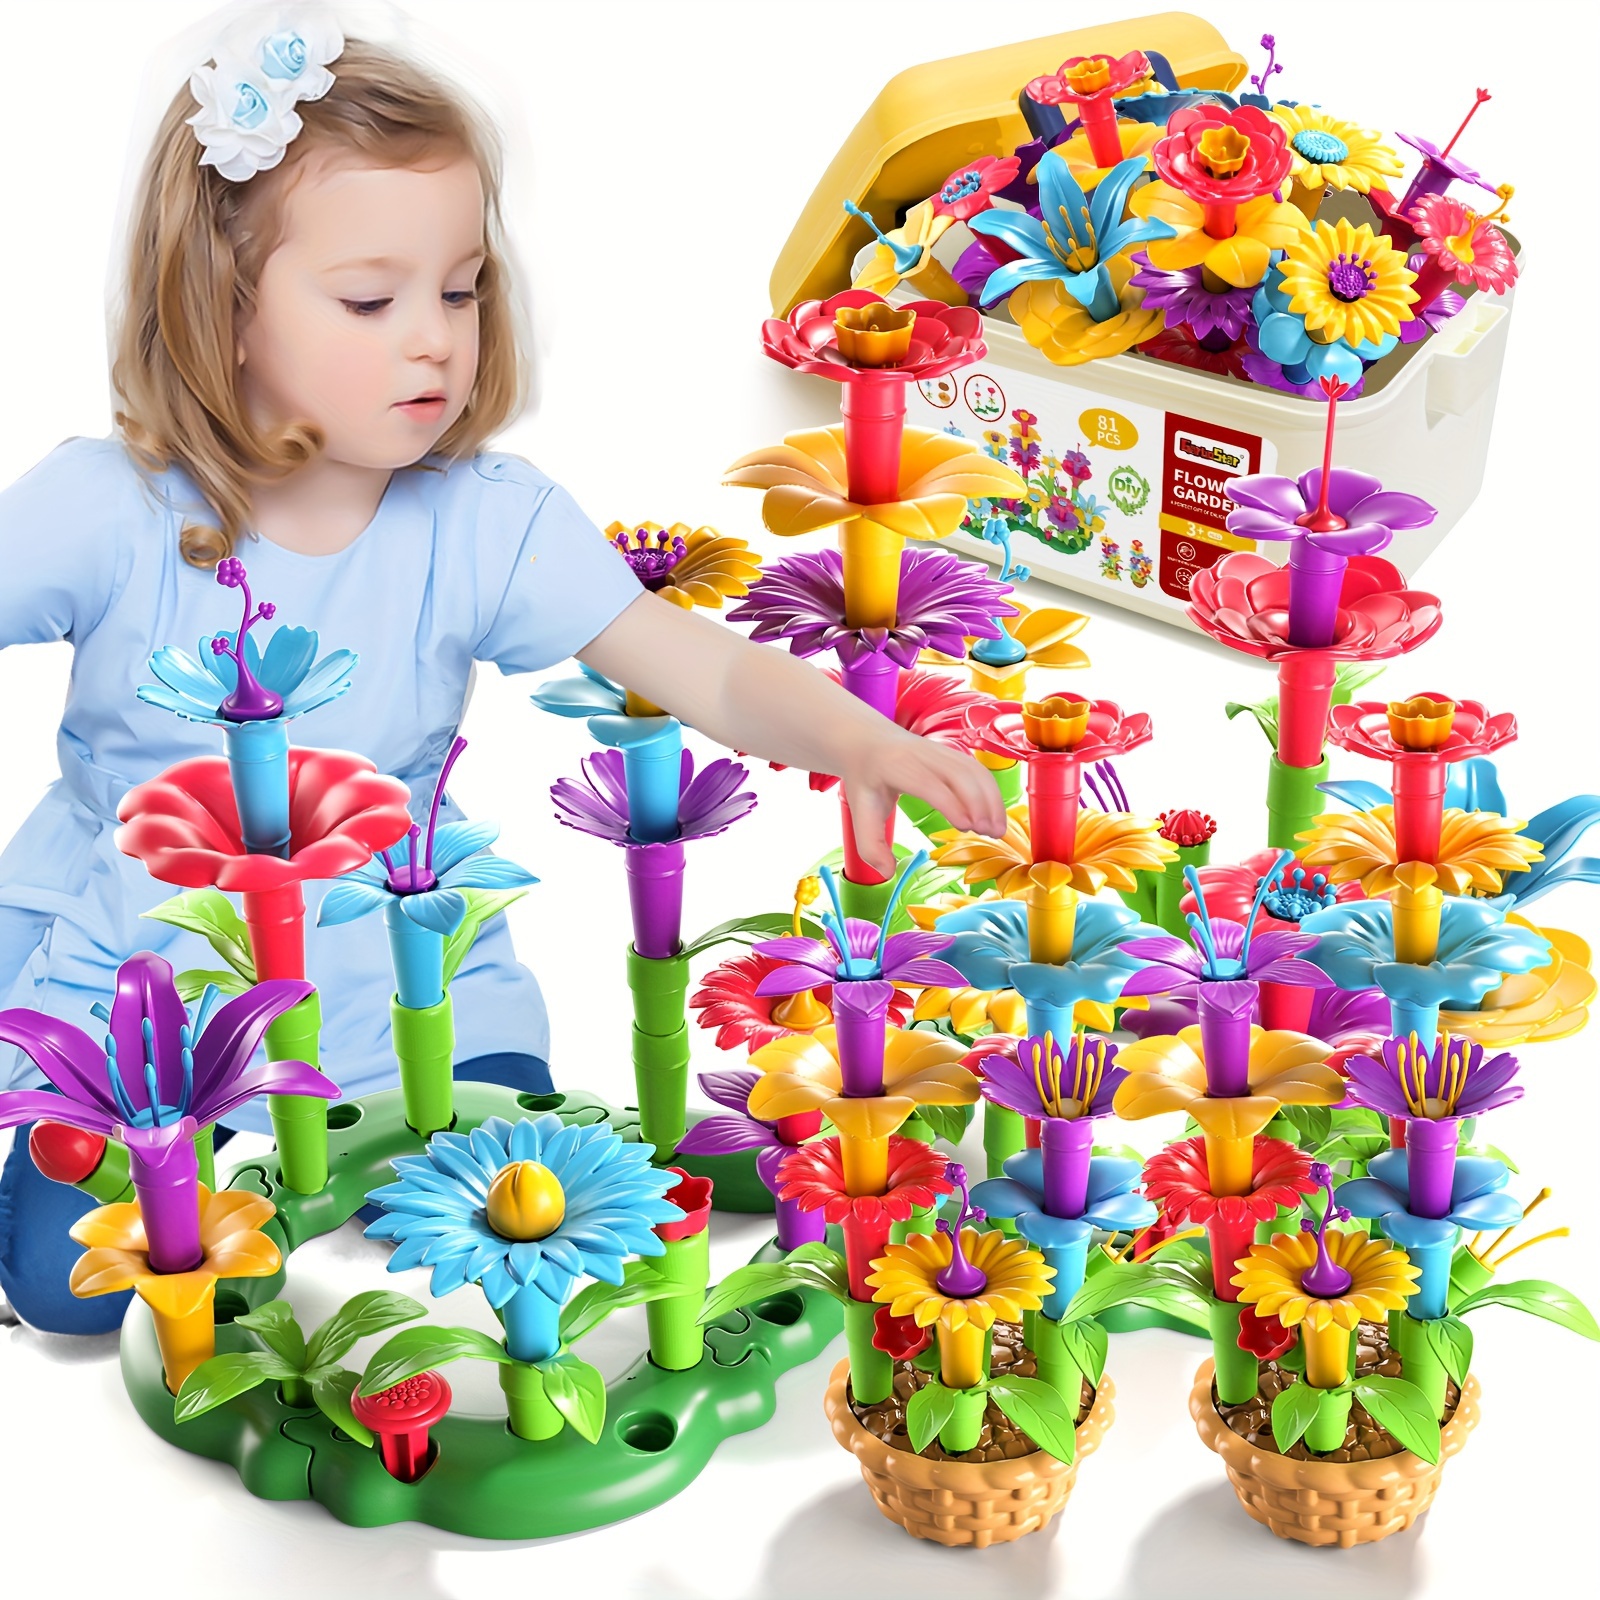 

Flower Garden Building Toys For 2 3 4 5 6 Year Old Girls, Educational Activity Preschool Birthday Gifts, Stem Toys For Kids Toddlers Ages 1-3 3-5